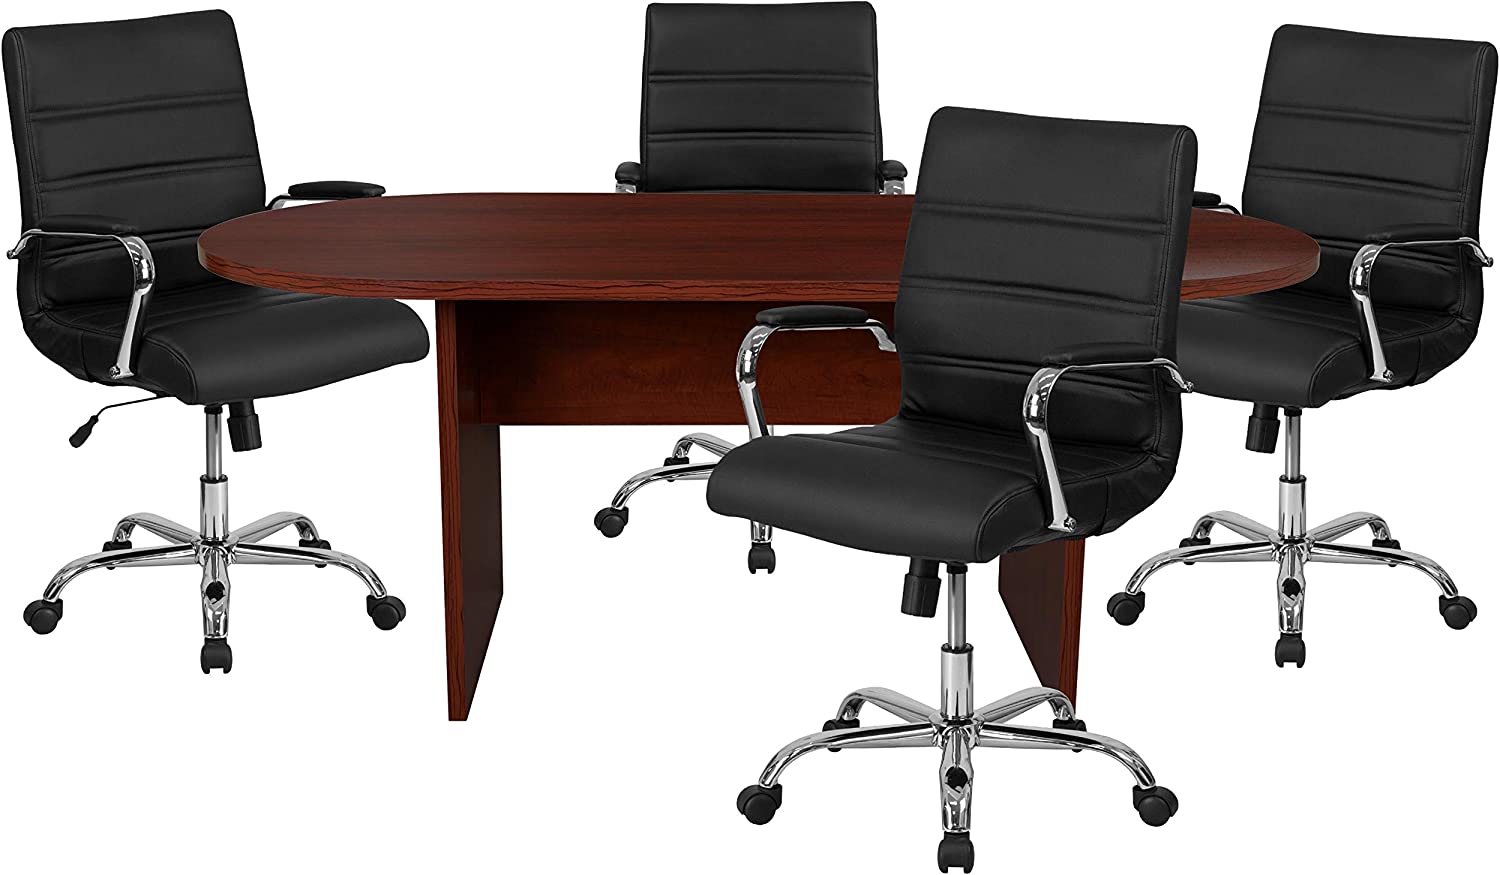 Flash Furniture 5 Piece Mahogany Oval Conference Table Set with 4 Black and Chrome LeatherSoft Executive Chairs